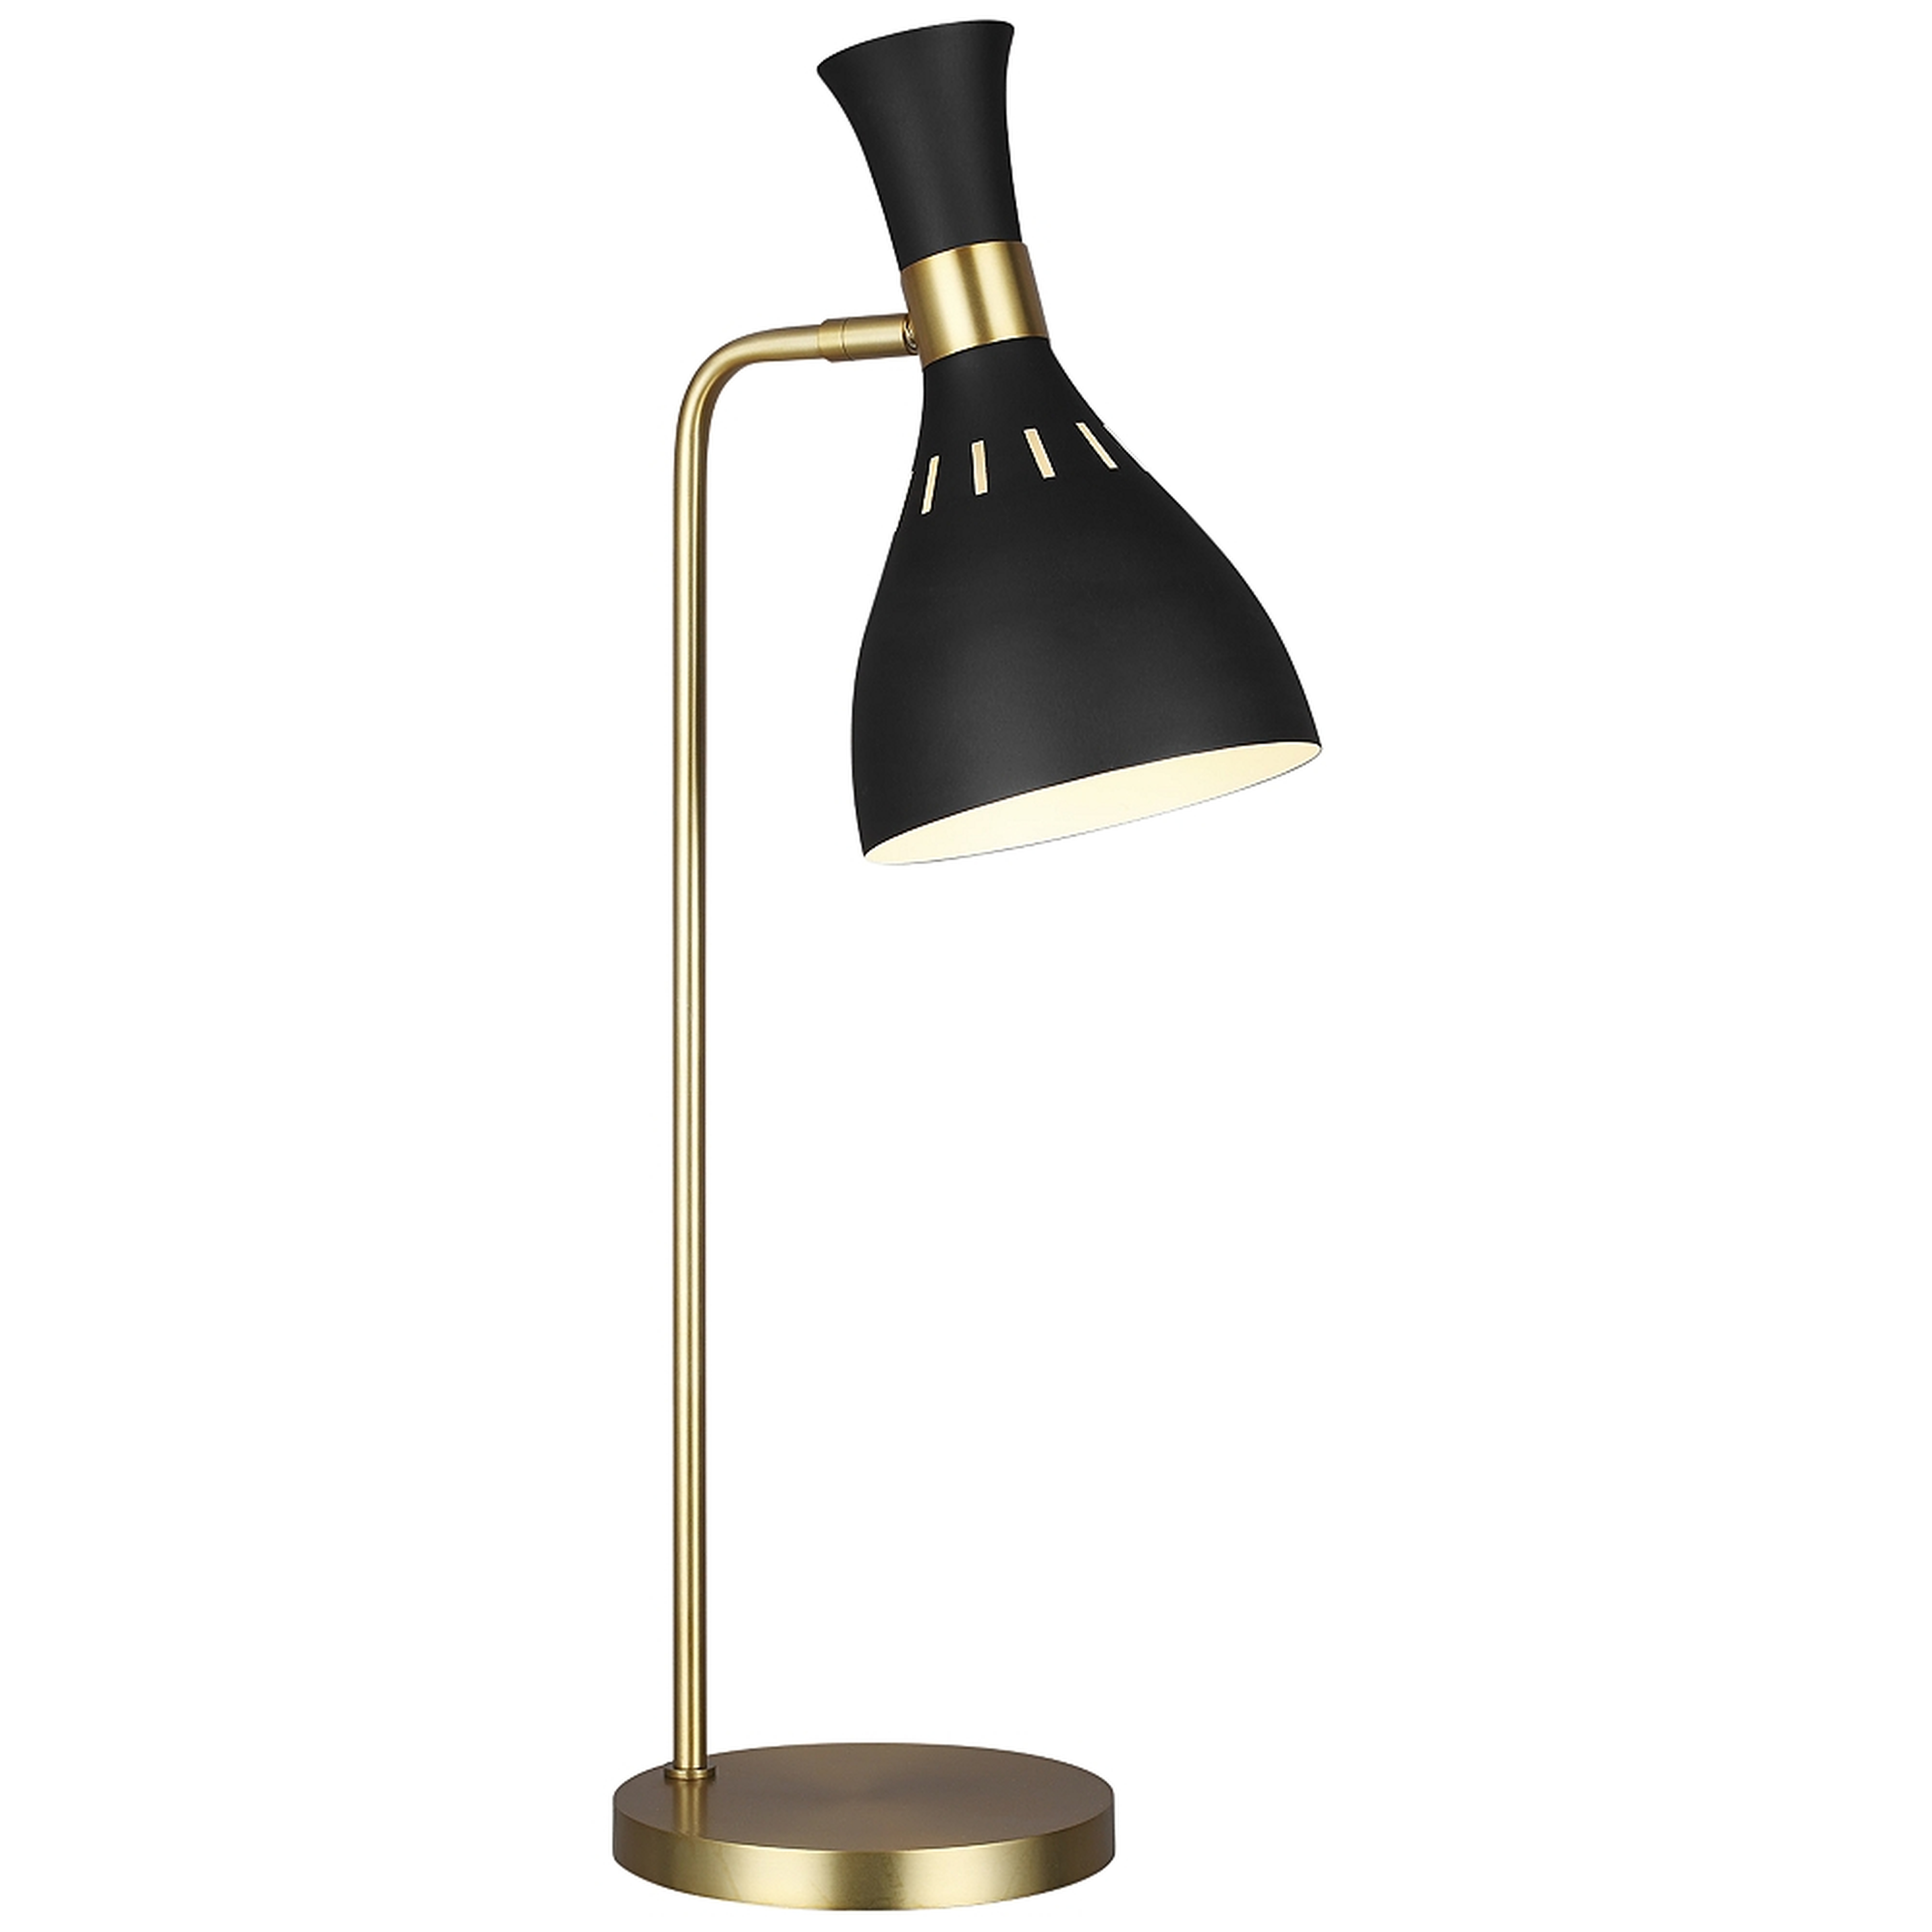 Joan Midnight Black and Burnished Brass LED Desk Lamp - Style # 97E89 - Lamps Plus